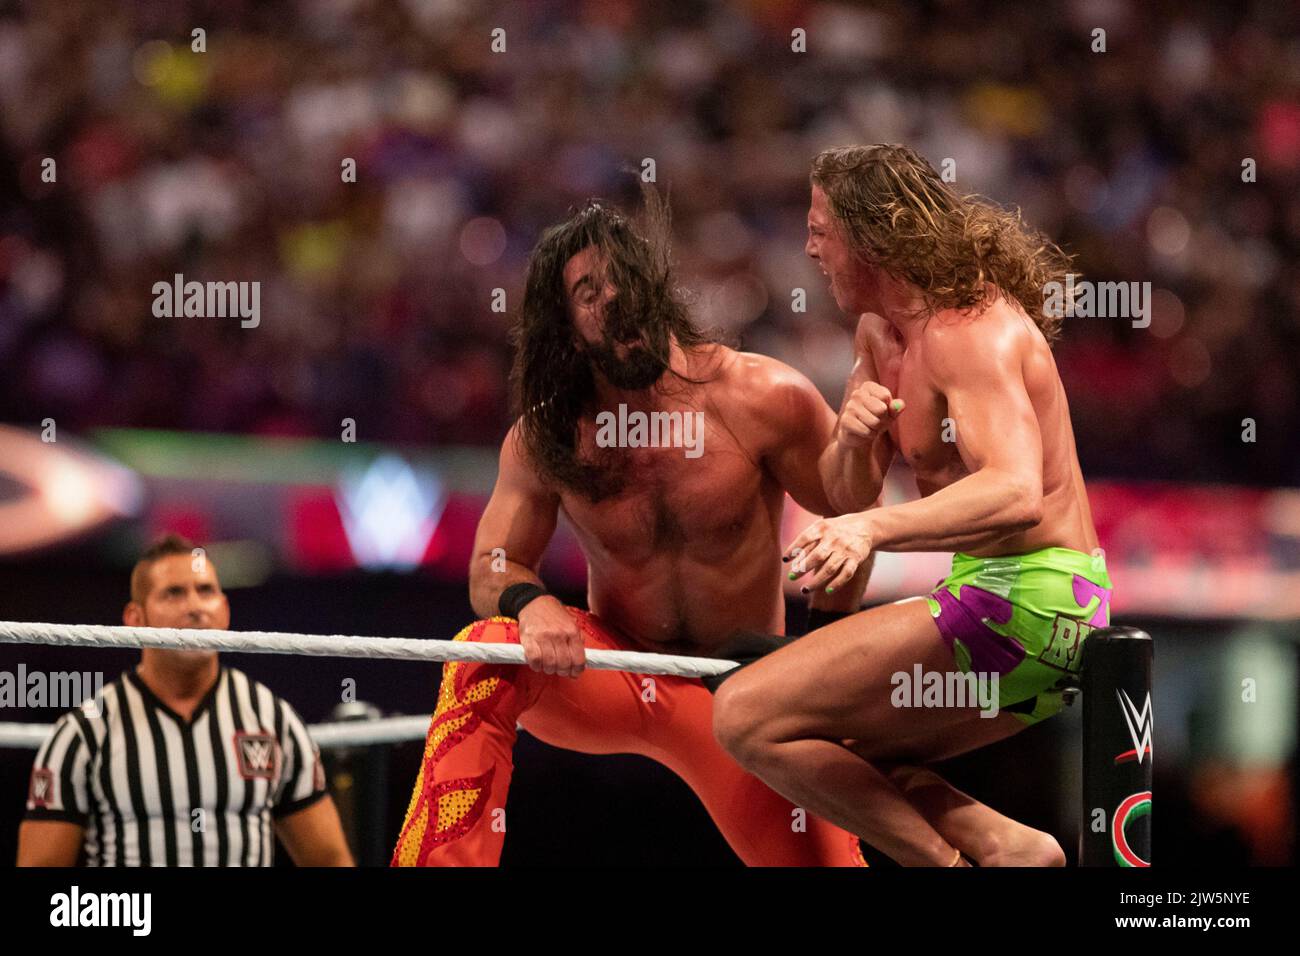 Cardiff, Wales, UK. 3rd Sep, 2022. Matt Riddle vs. Seth "Freakin" Rollins during the WWE ‘Clash At The Castle' wrestling event at the Principality Stadium in Cardiff. Credit: Mark Hawkins/Alamy Live News Stock Photo